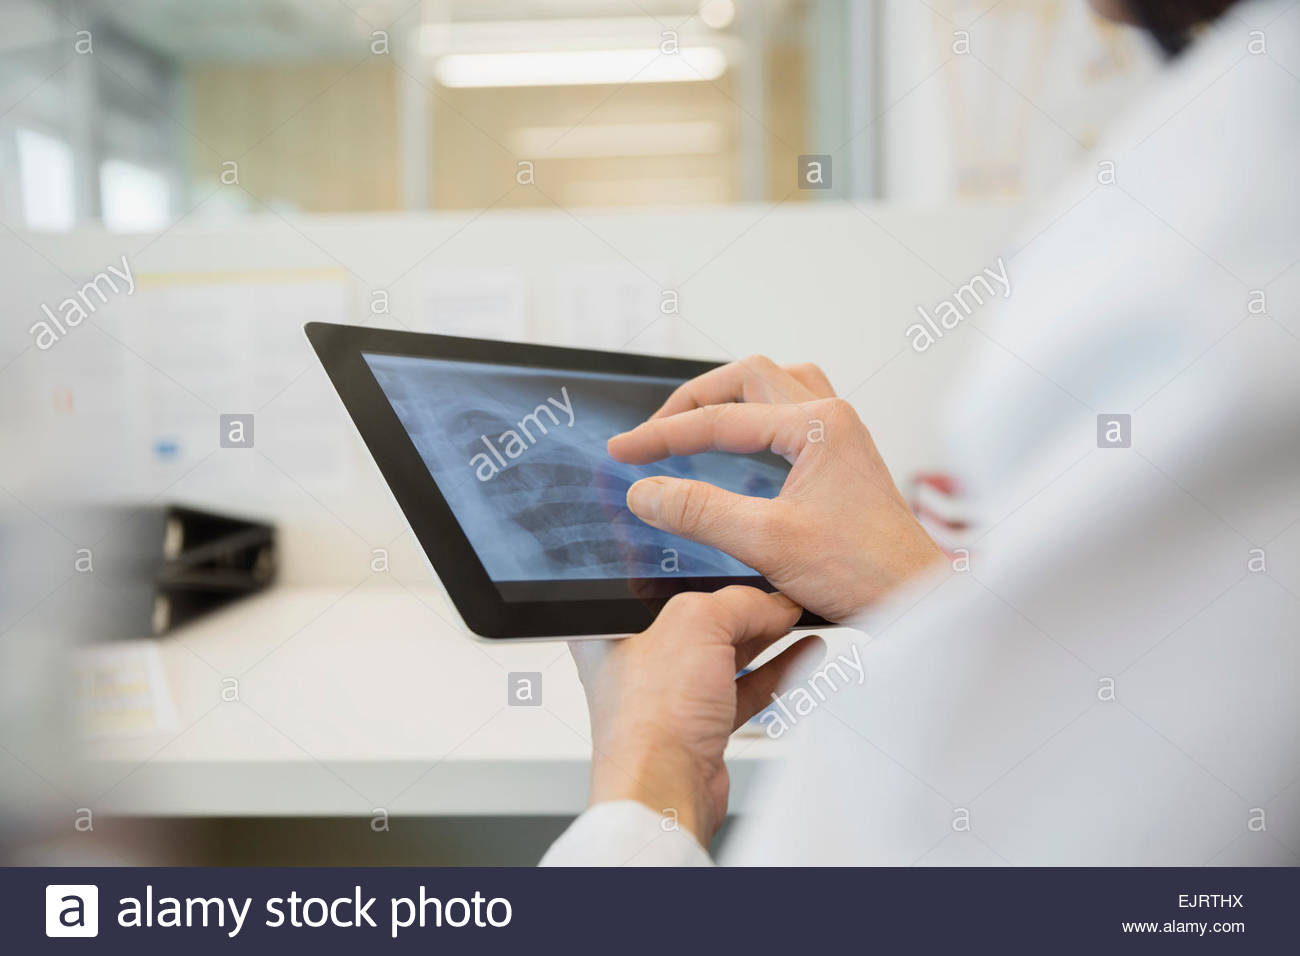 Doctor examining x-ray on digital tablet Banque D'Images